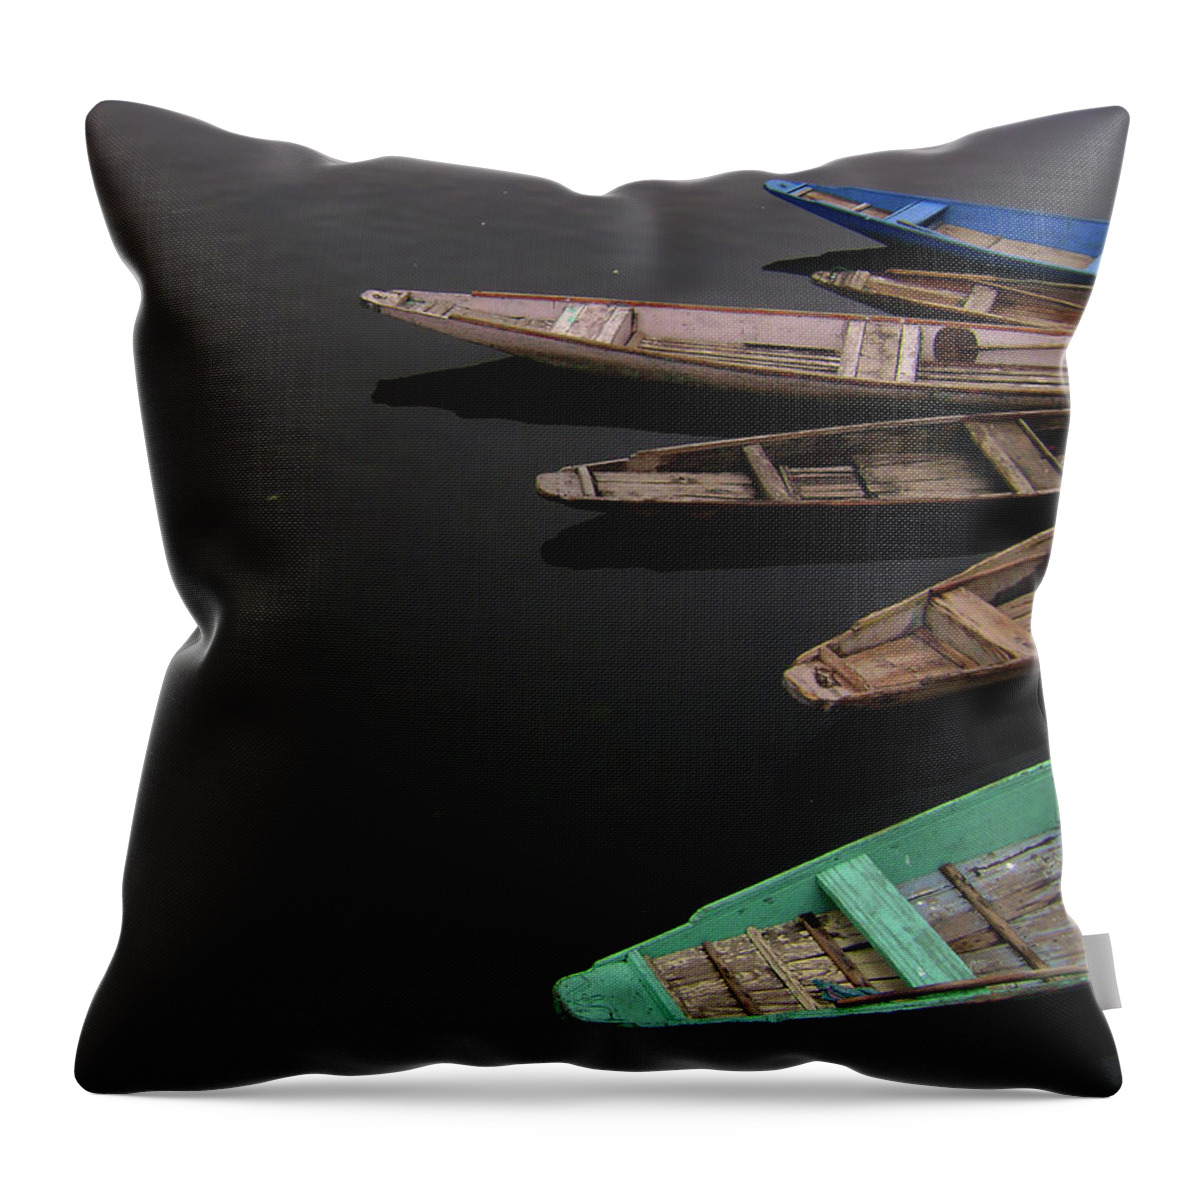 Tranquility Throw Pillow featuring the photograph Boats In Dal Lake by Manojaswathi Photography